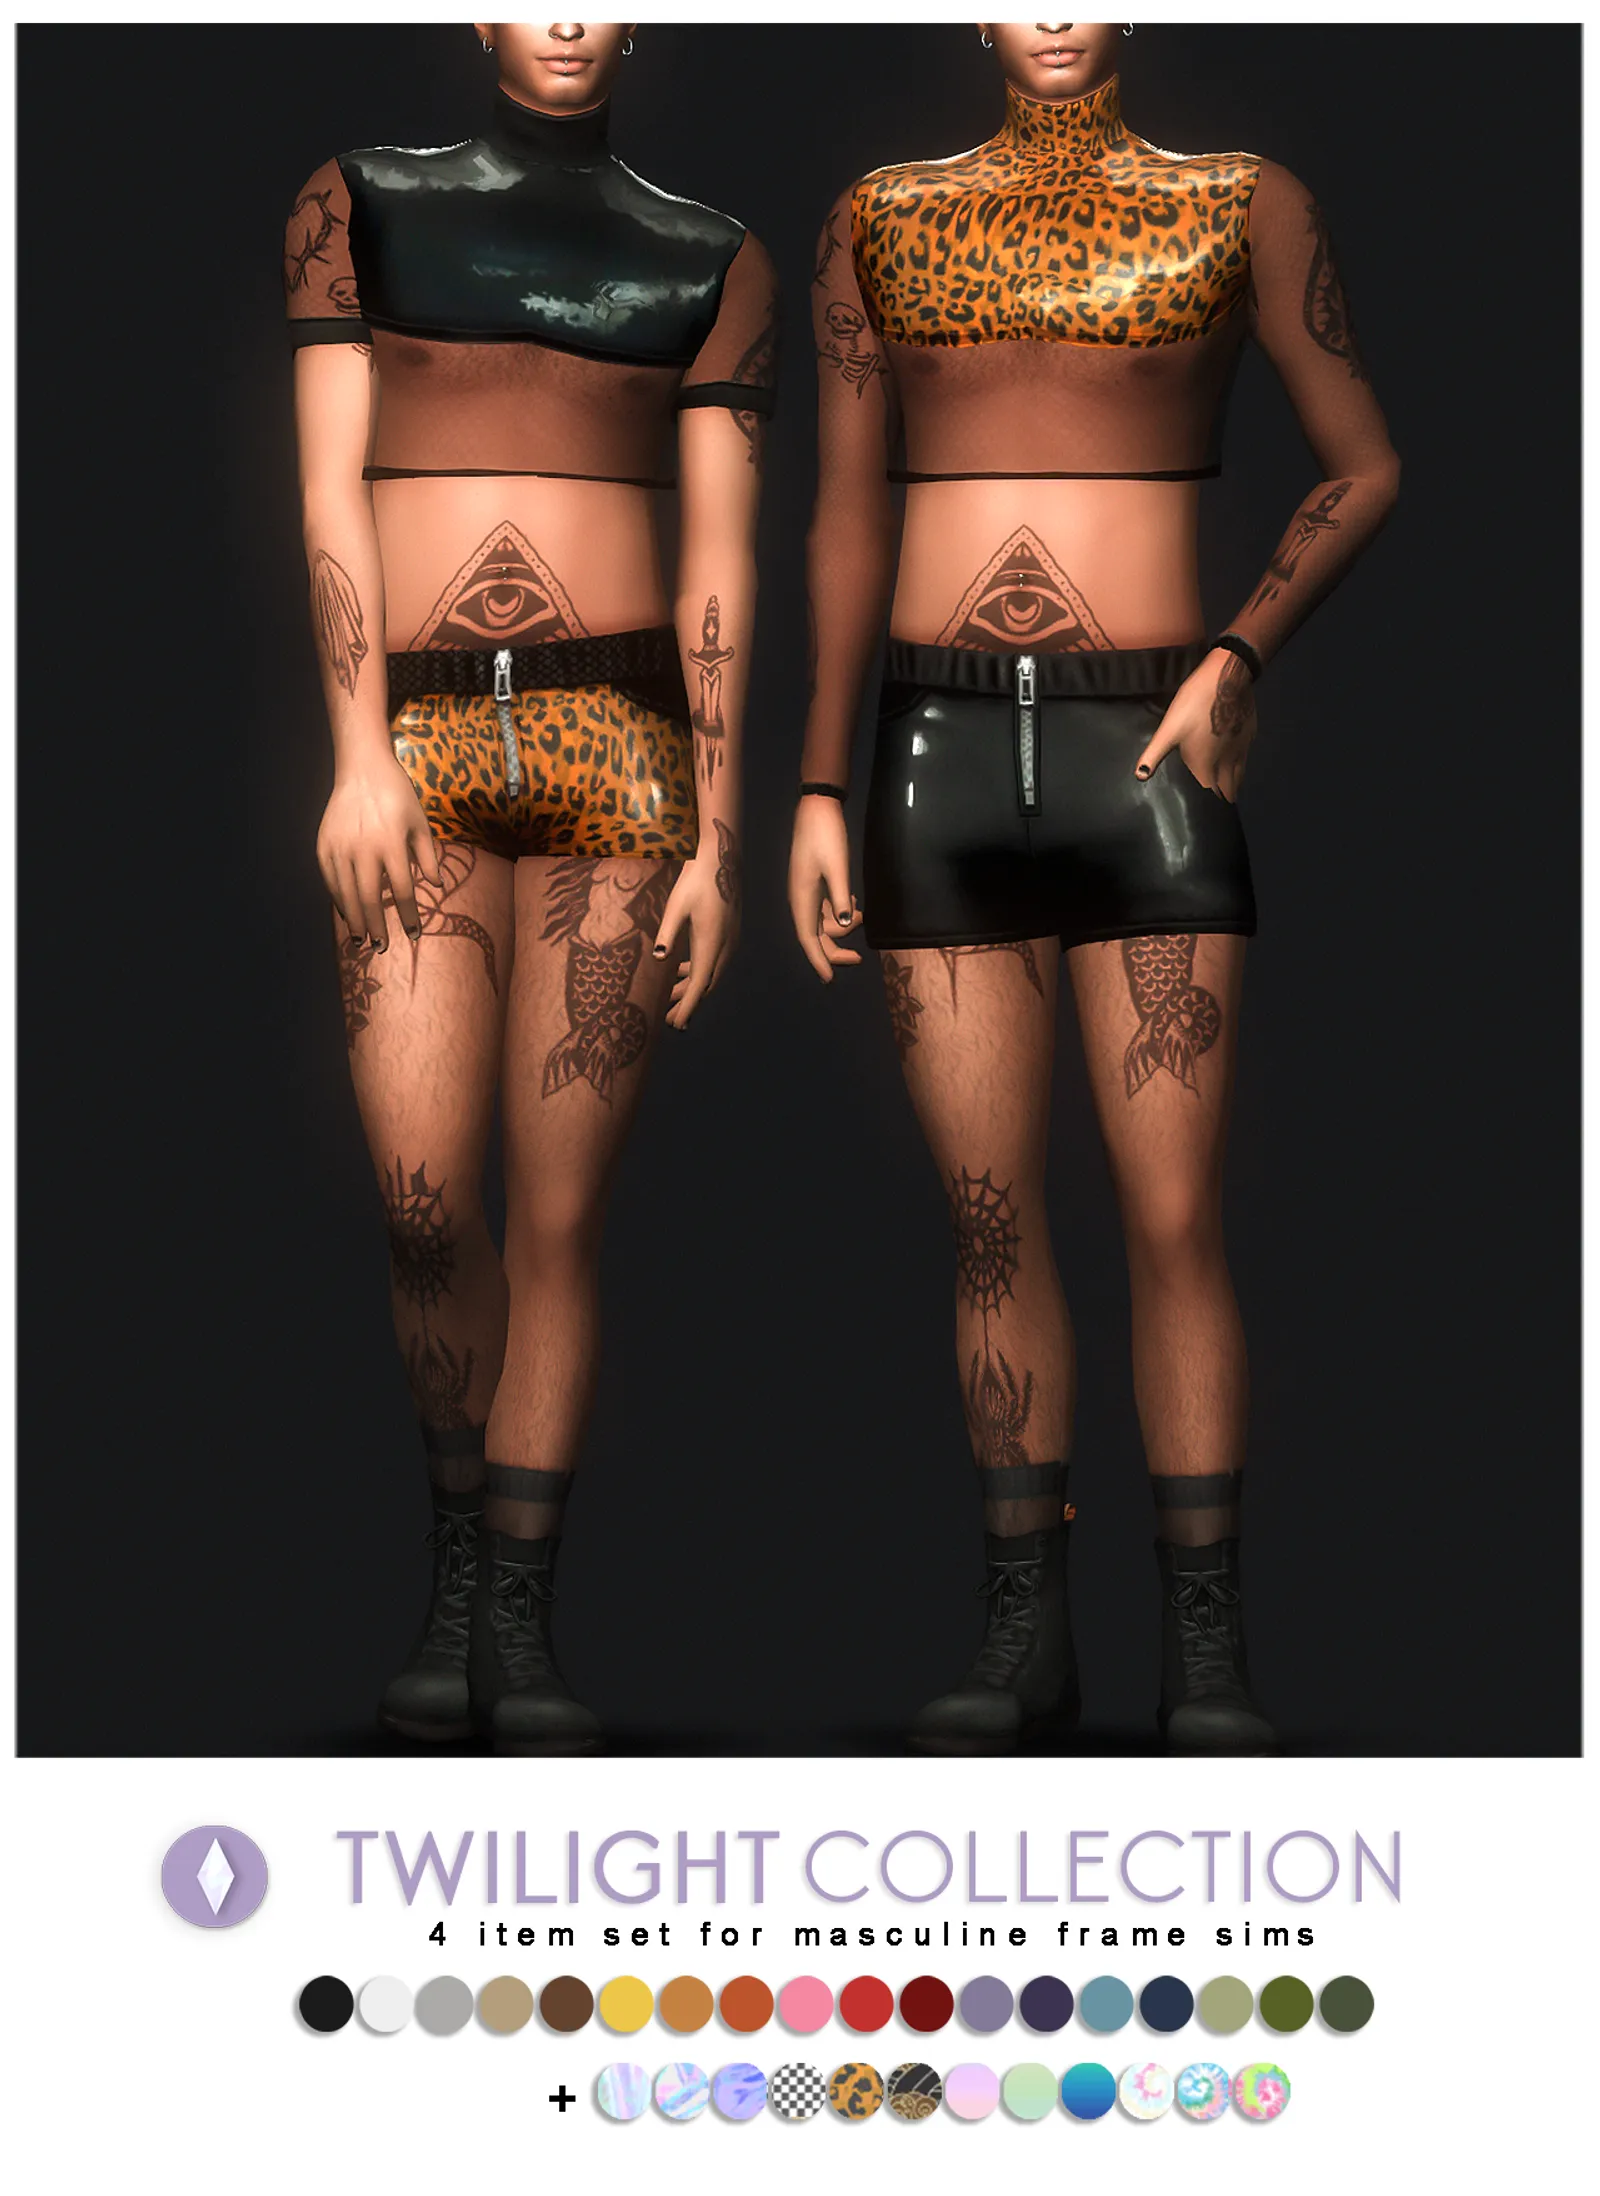 Twilight Collection